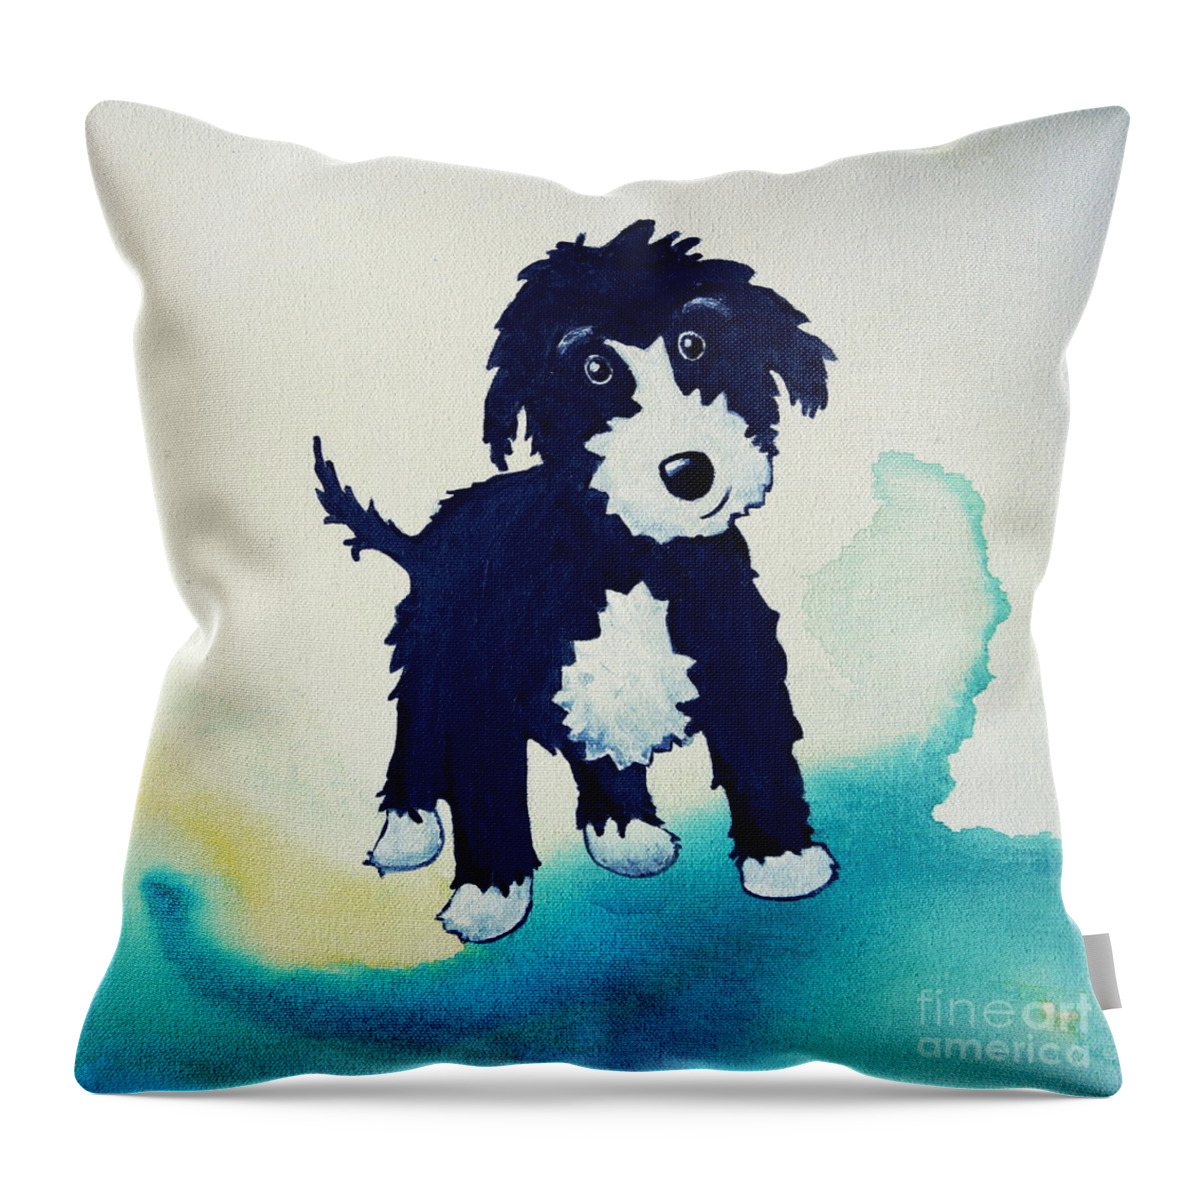 Children Throw Pillow featuring the painting Shaggy Dog by Shiela Gosselin